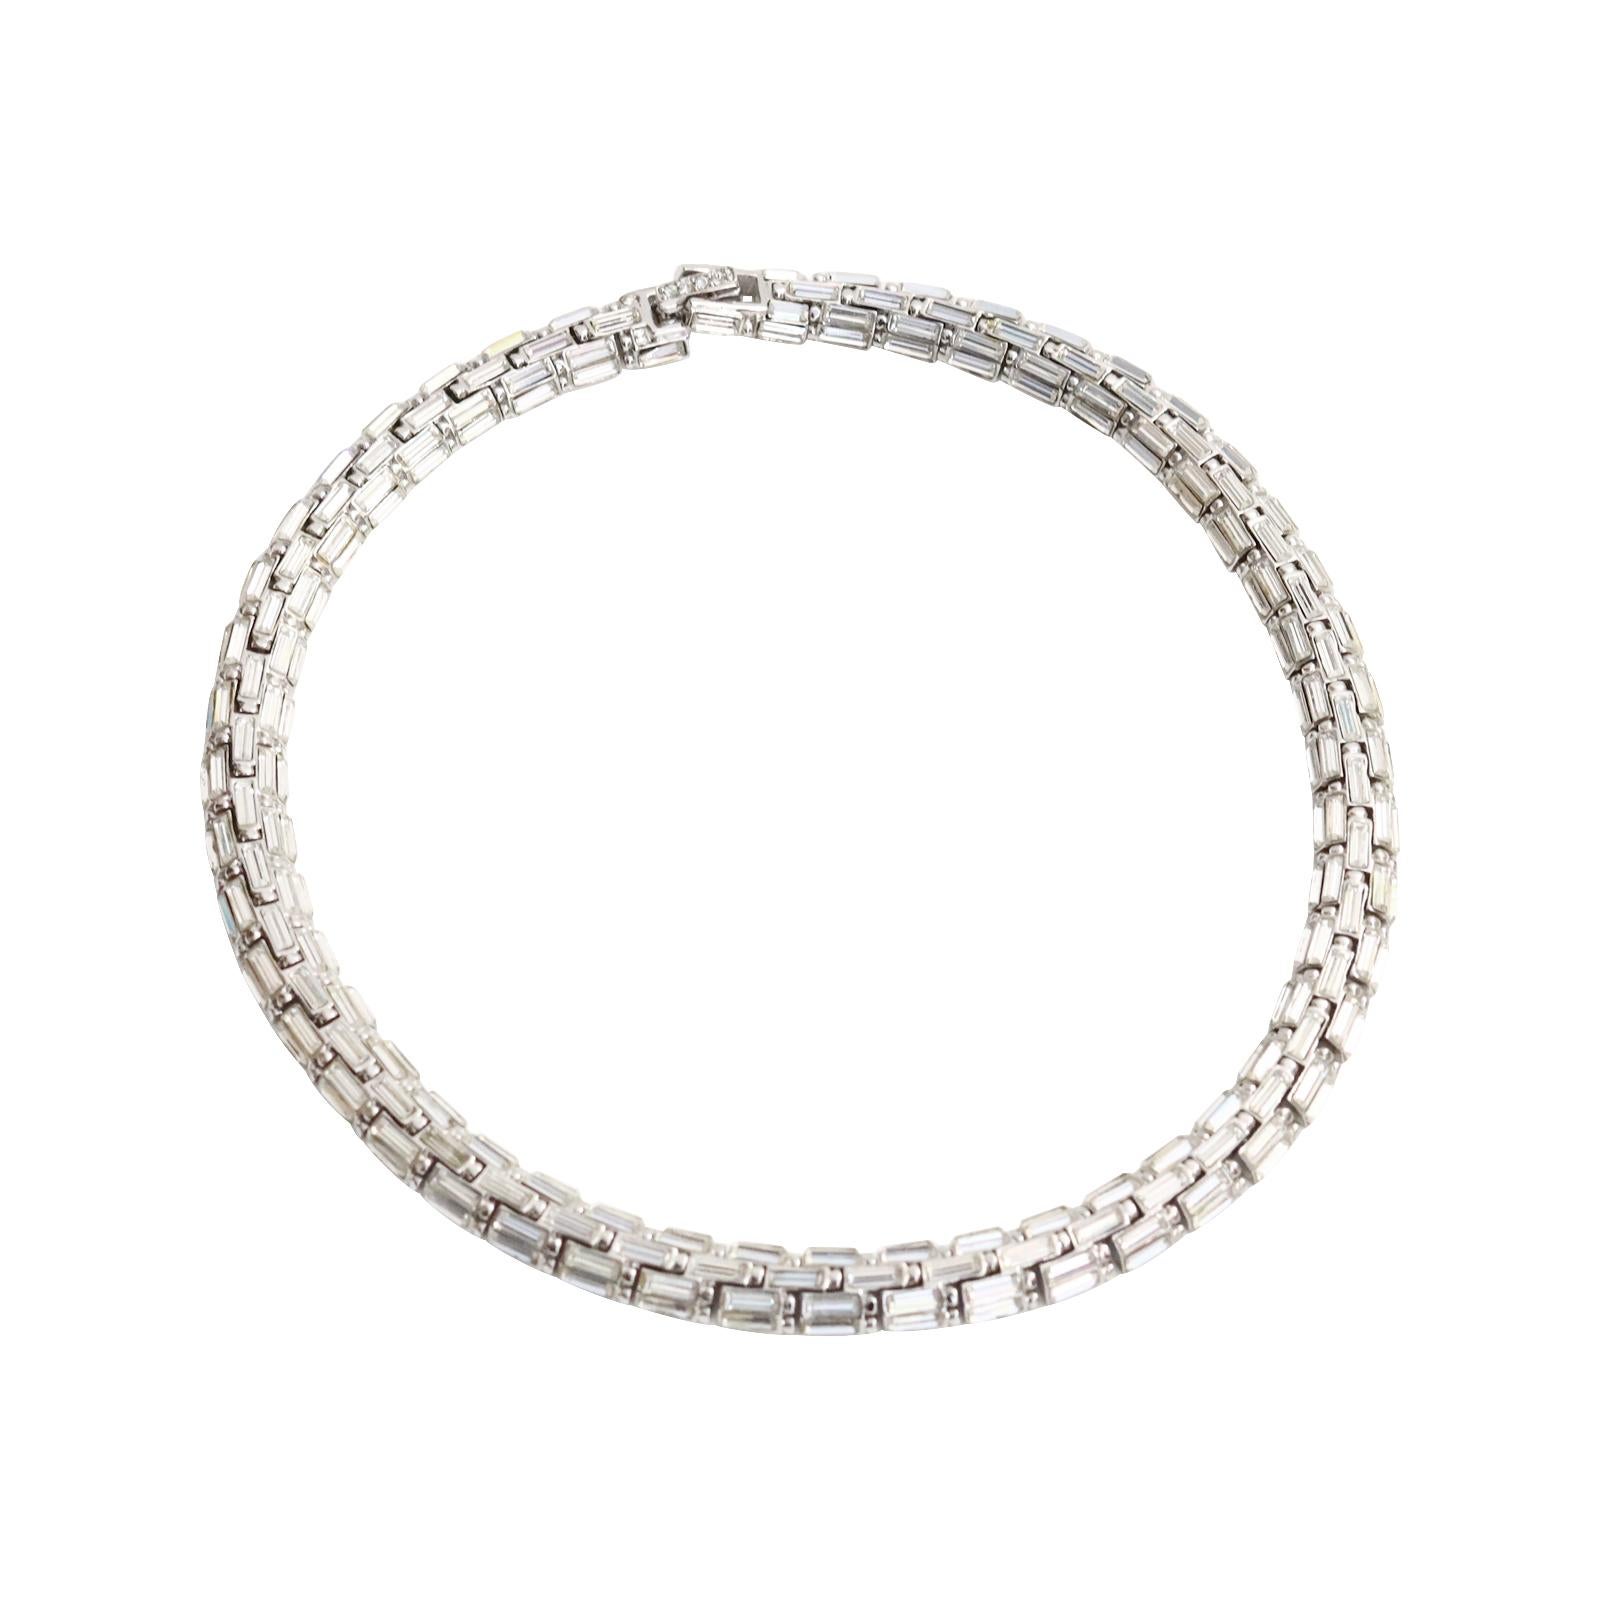 Vintage St John Crystal Collar Necklace Circa 1990s. A classic necklace collar with baguettes that make up a domed and rounded necklace. Now, I said classic but this can also be worn very edgy with a white t shirt and mixed with a gold necklace or